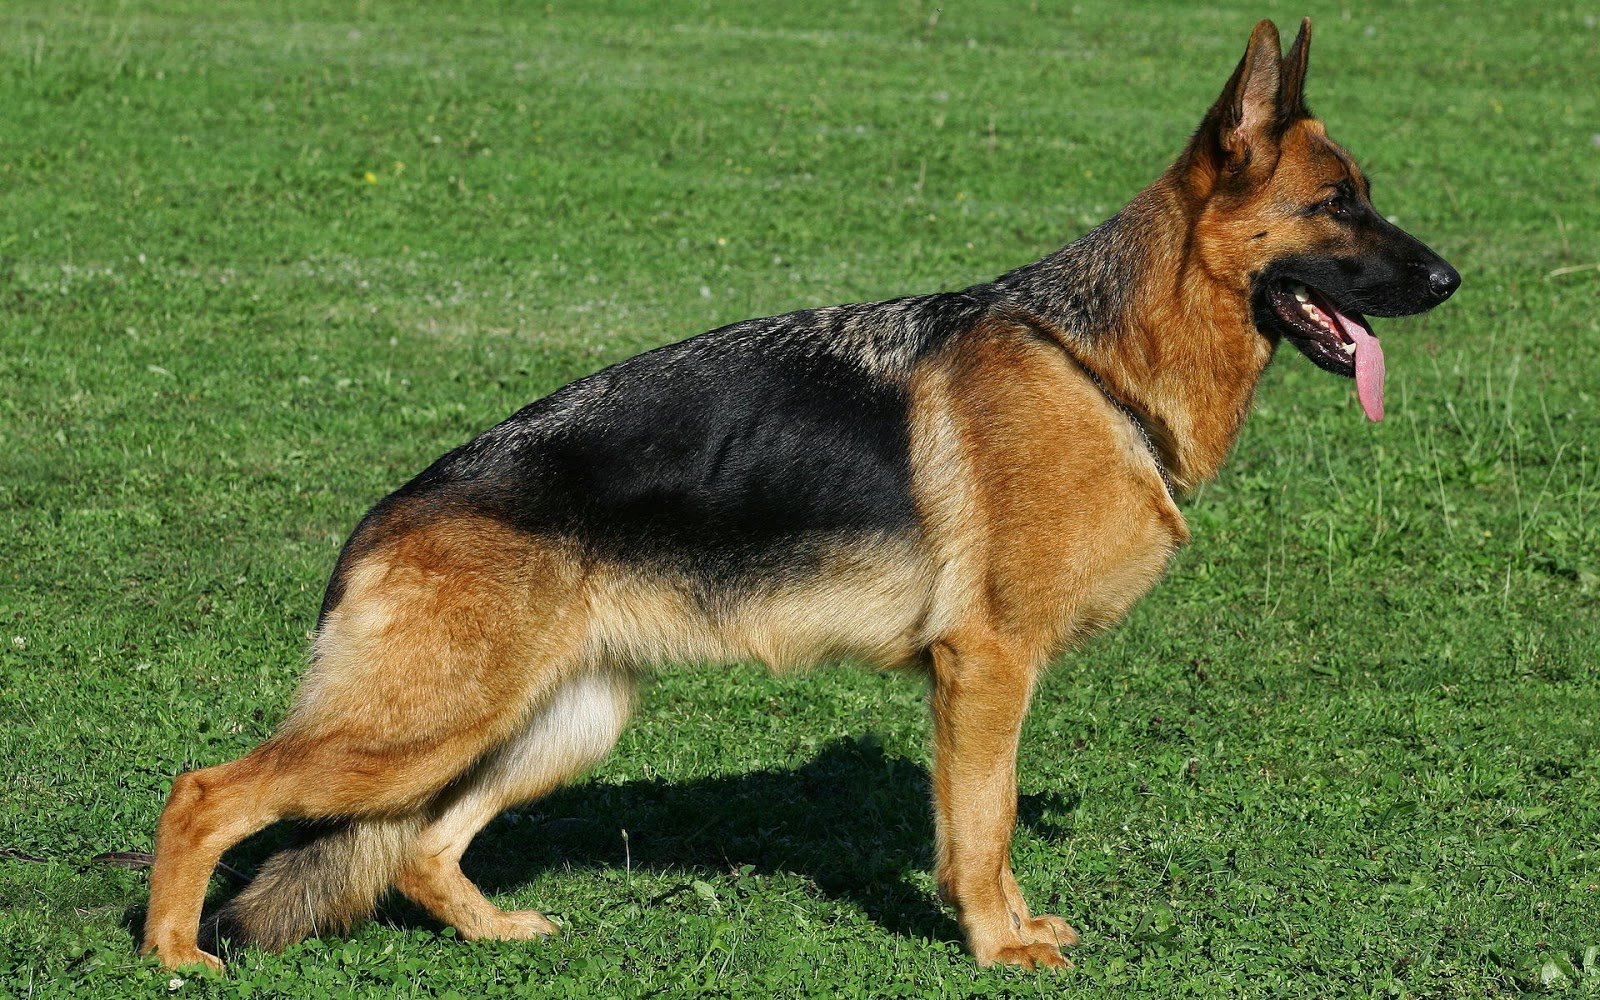 Rules of the Jungle: German shepherd dogs